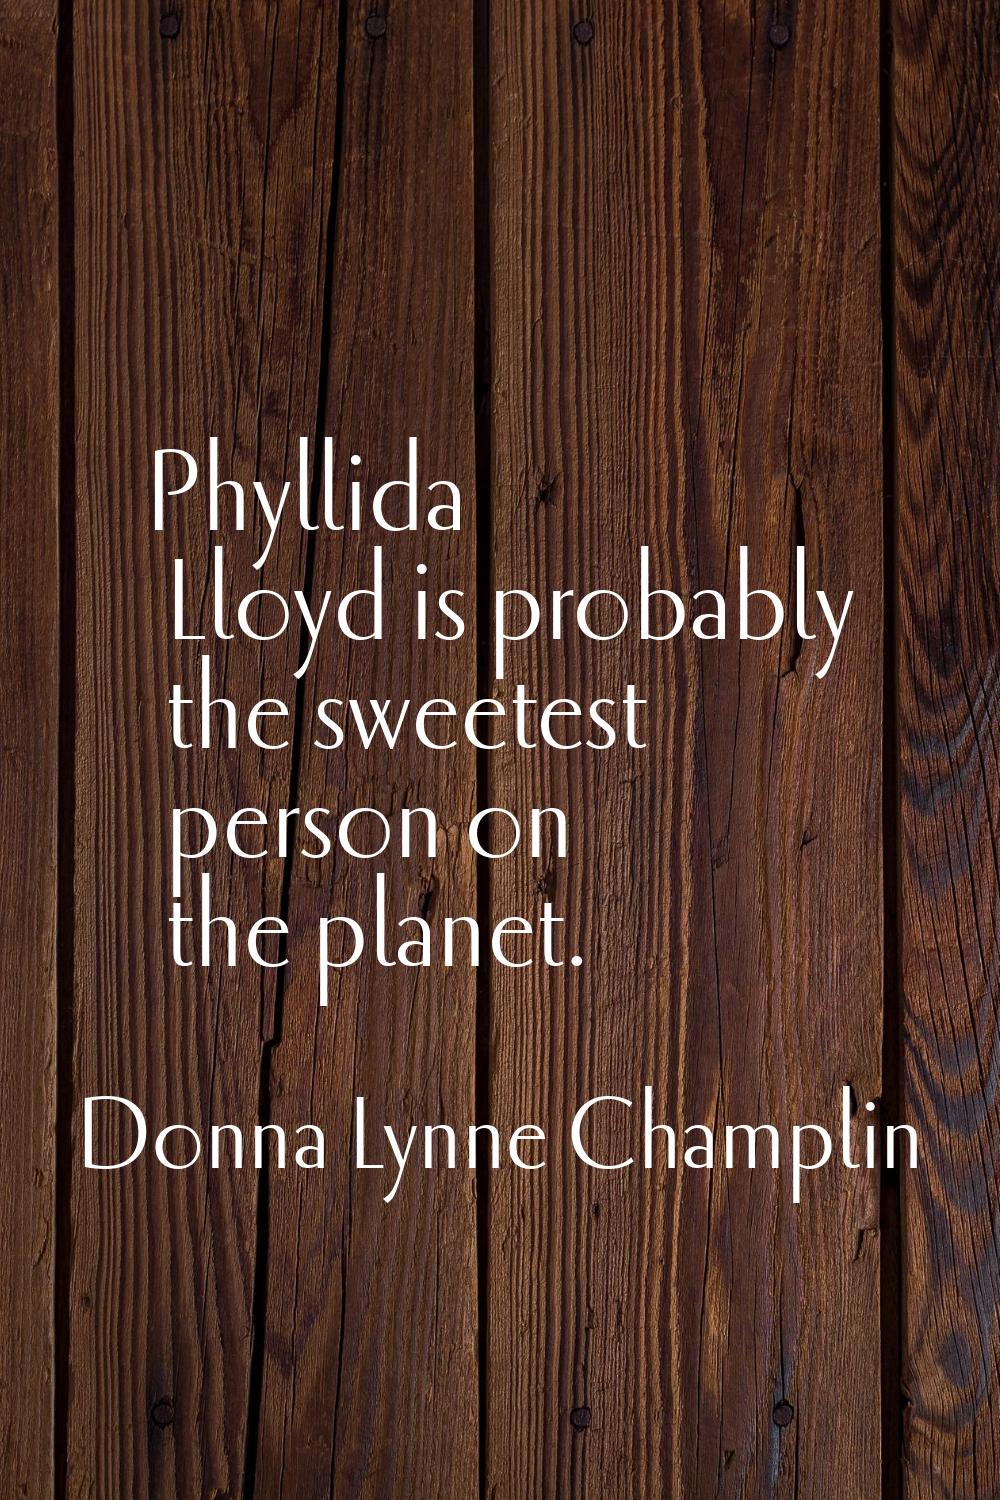 Phyllida Lloyd is probably the sweetest person on the planet.